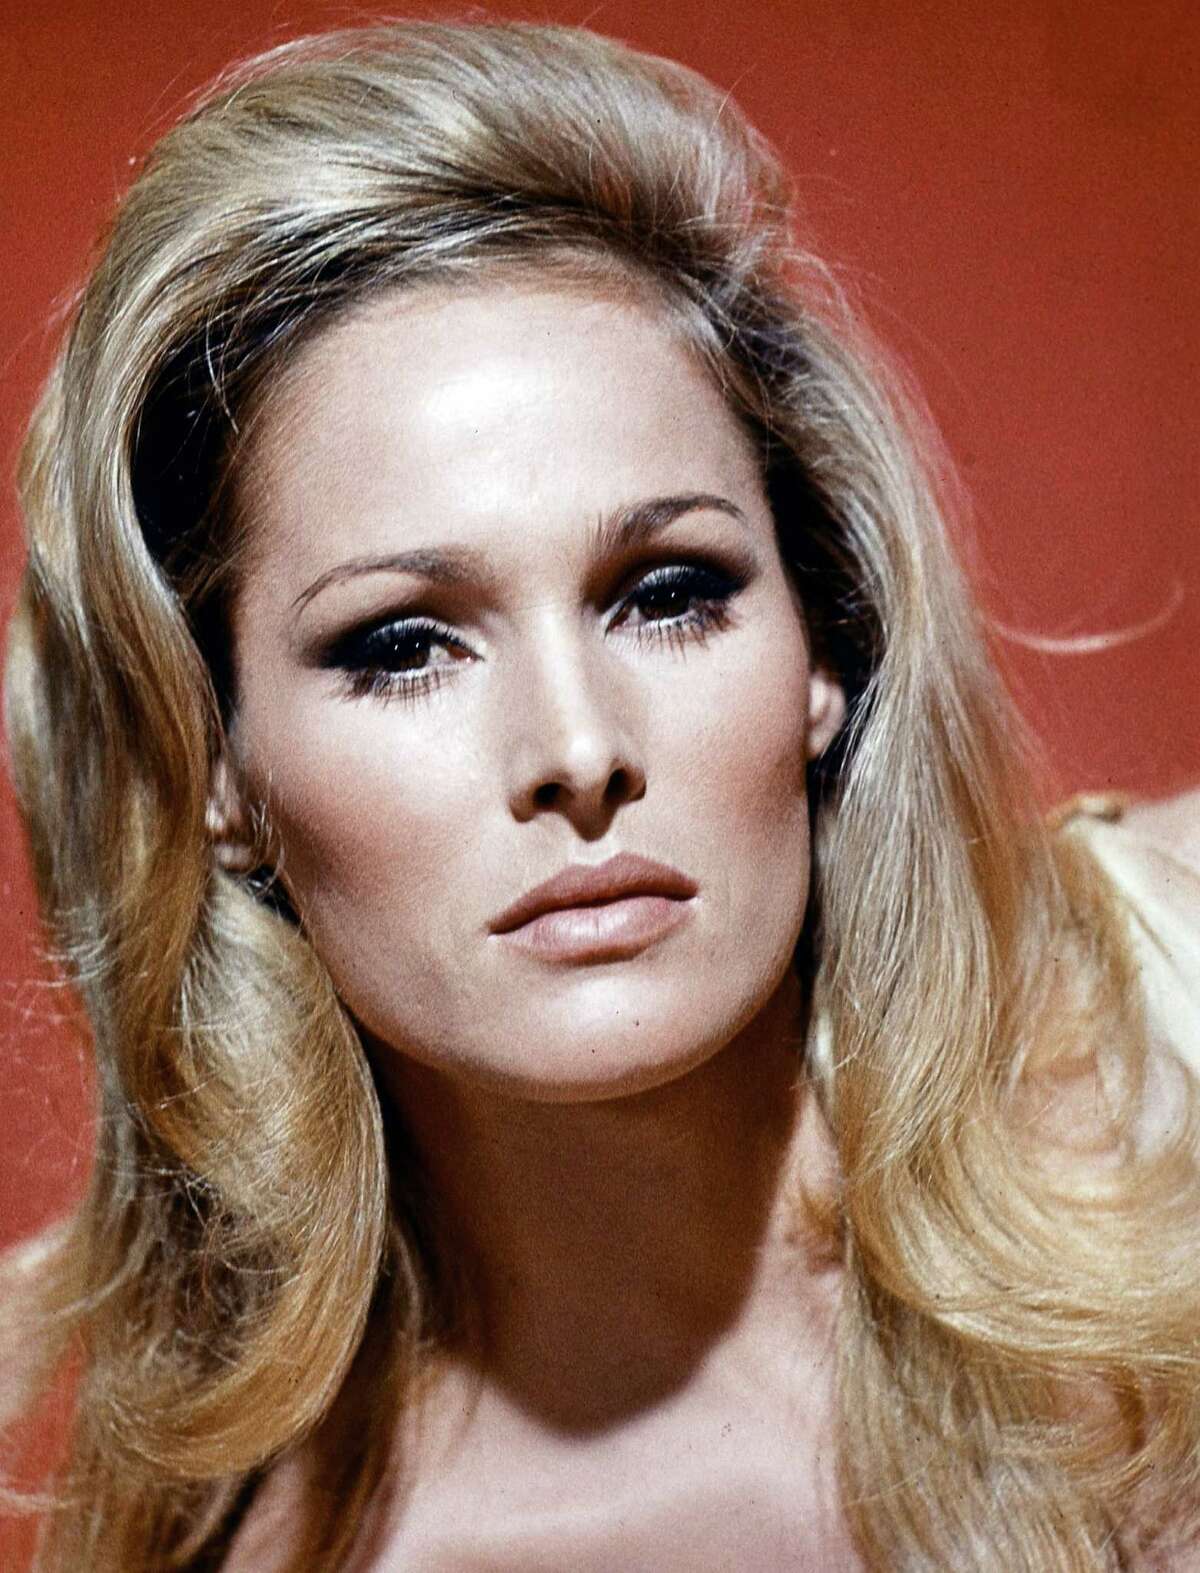 Ursula Andress turns 80: Then and now